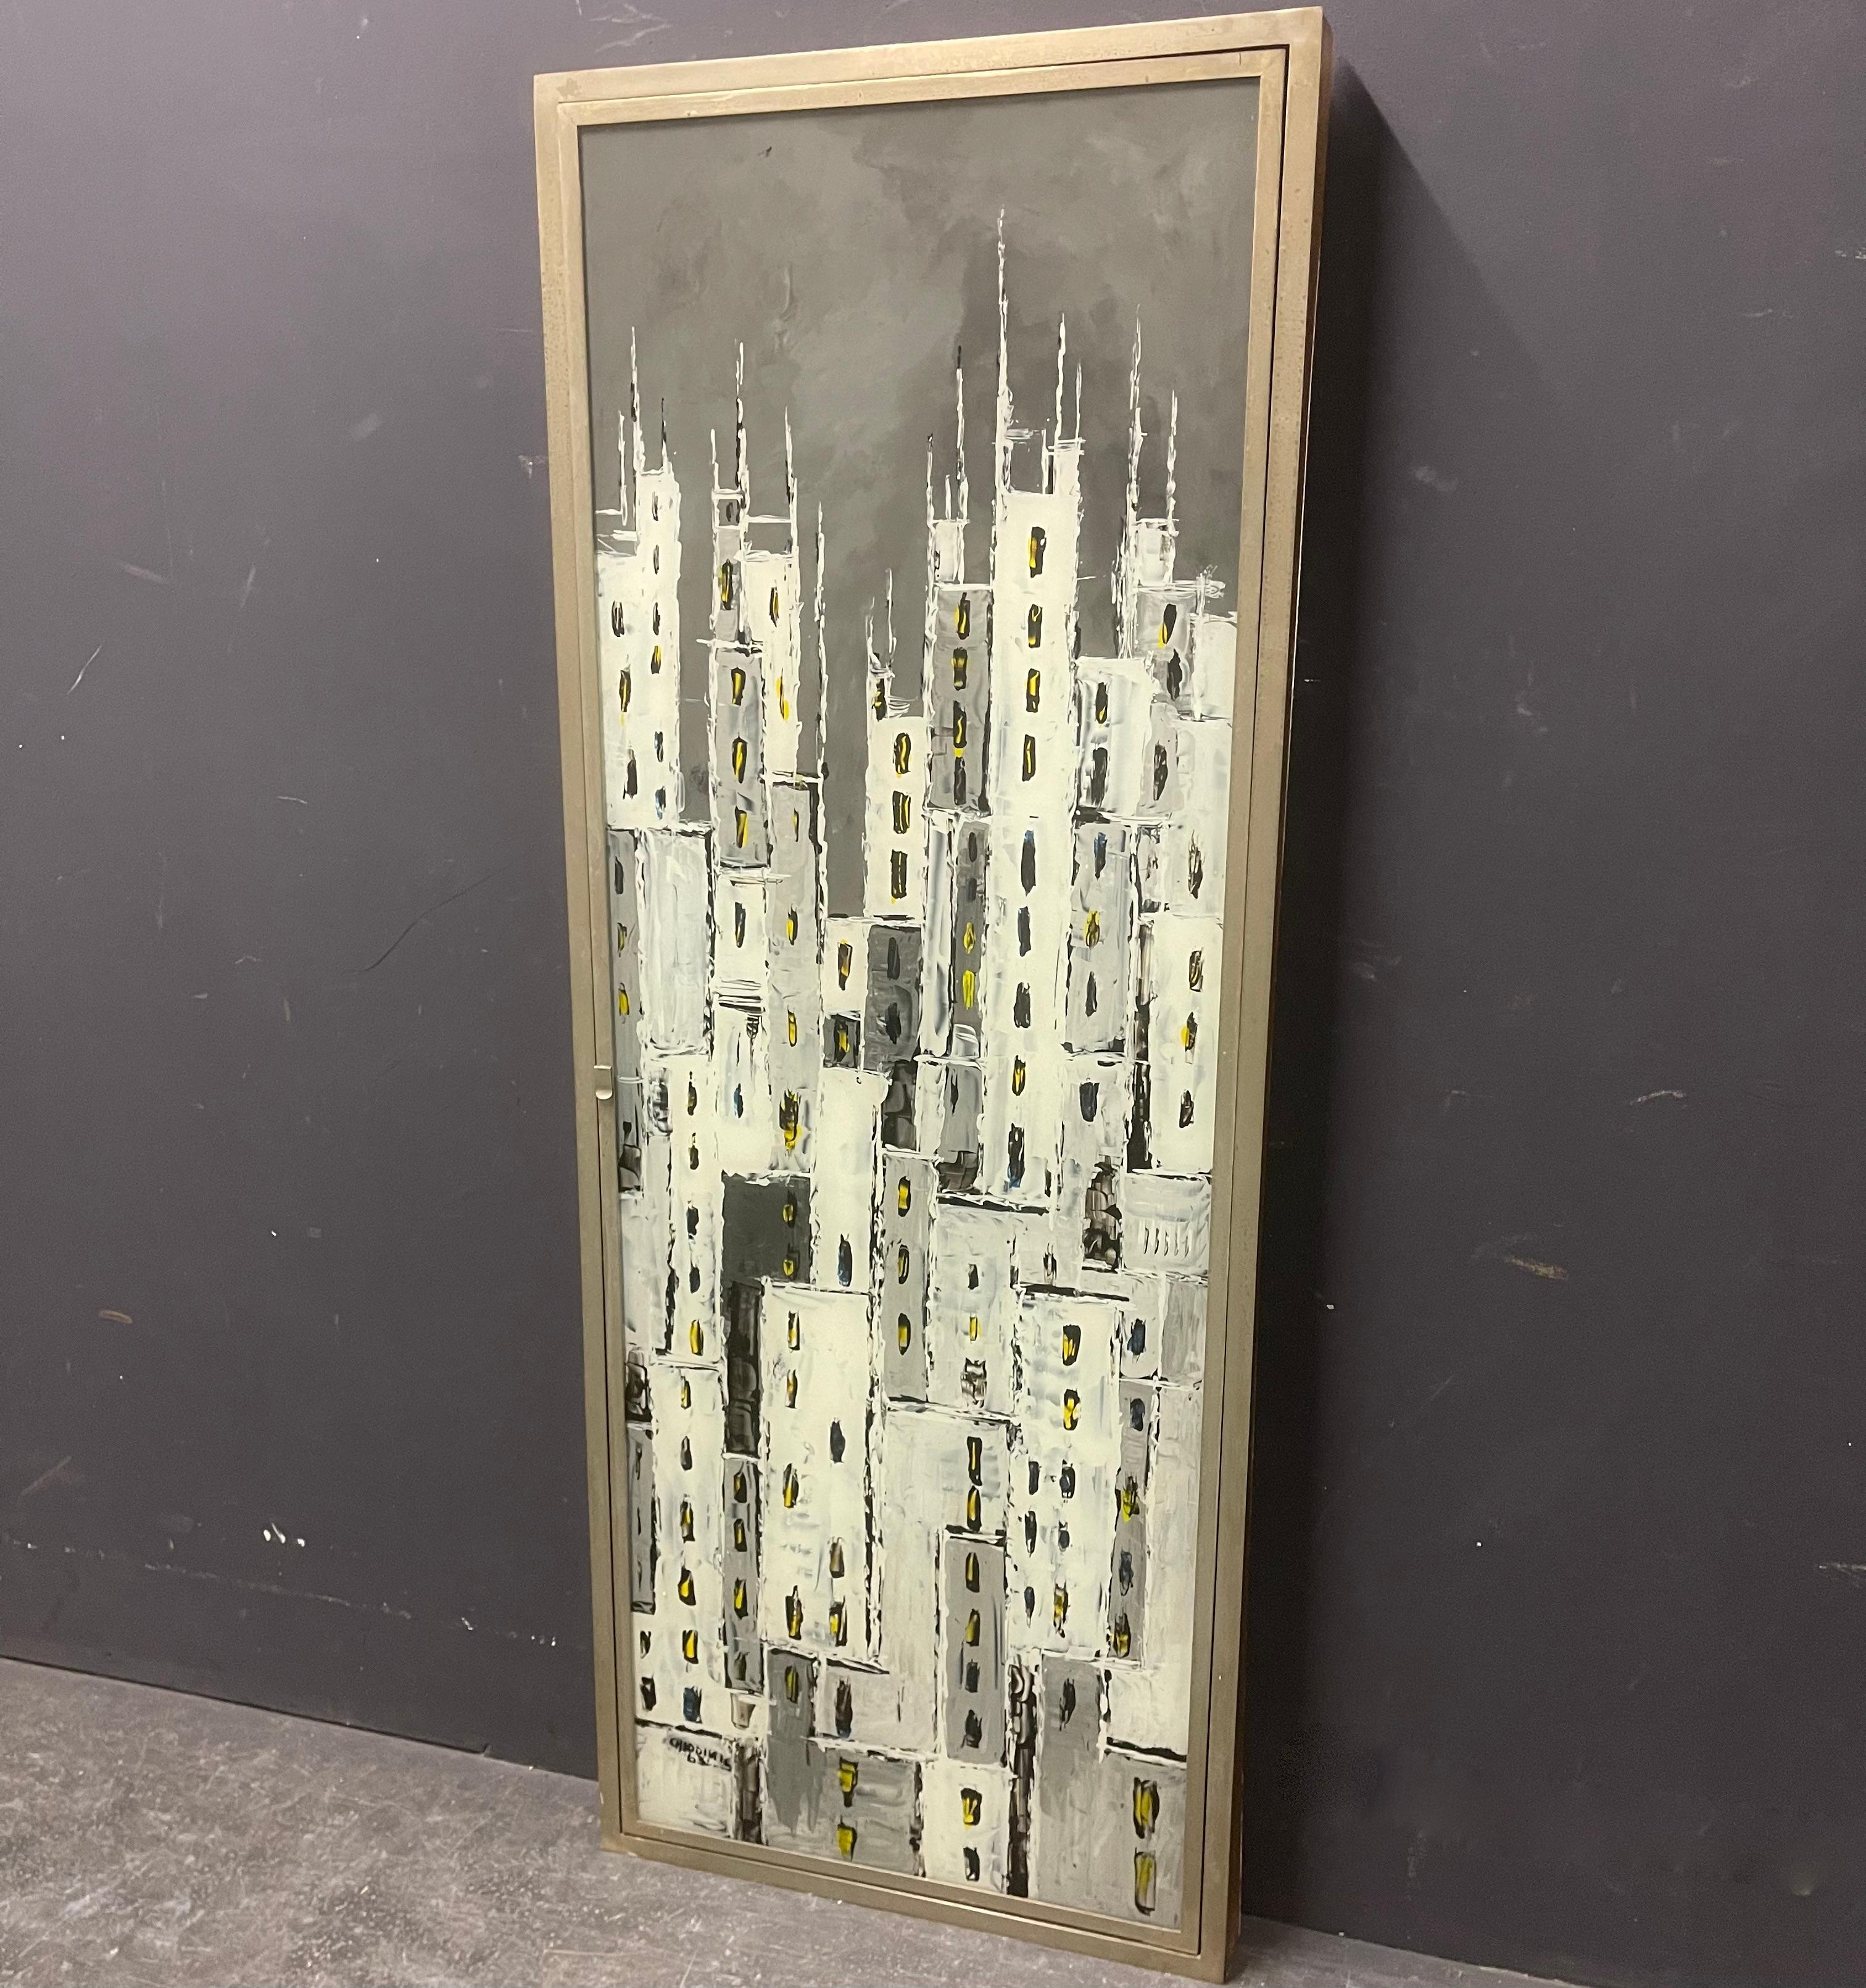 we are very proud and excited to offer this wonderful piece of mid-century design. one one hand it´s a beautiful reverse glass painting on the other hand it´s a great and big triptych mirror to be hung on the wall.
We have not been able to find any